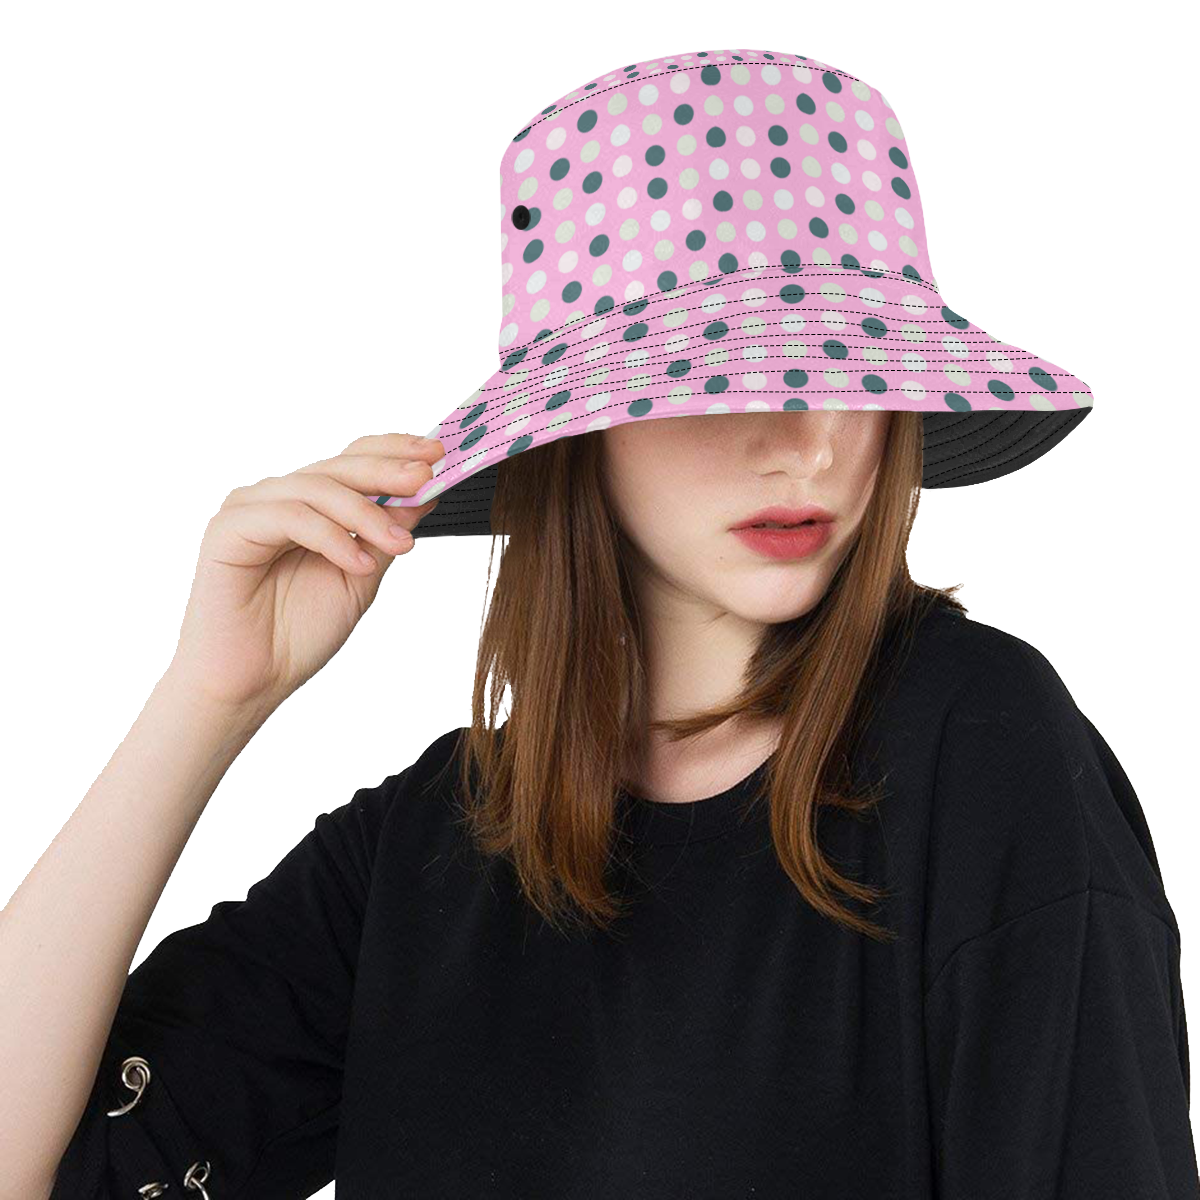 teal white eggs on pink All Over Print Bucket Hat